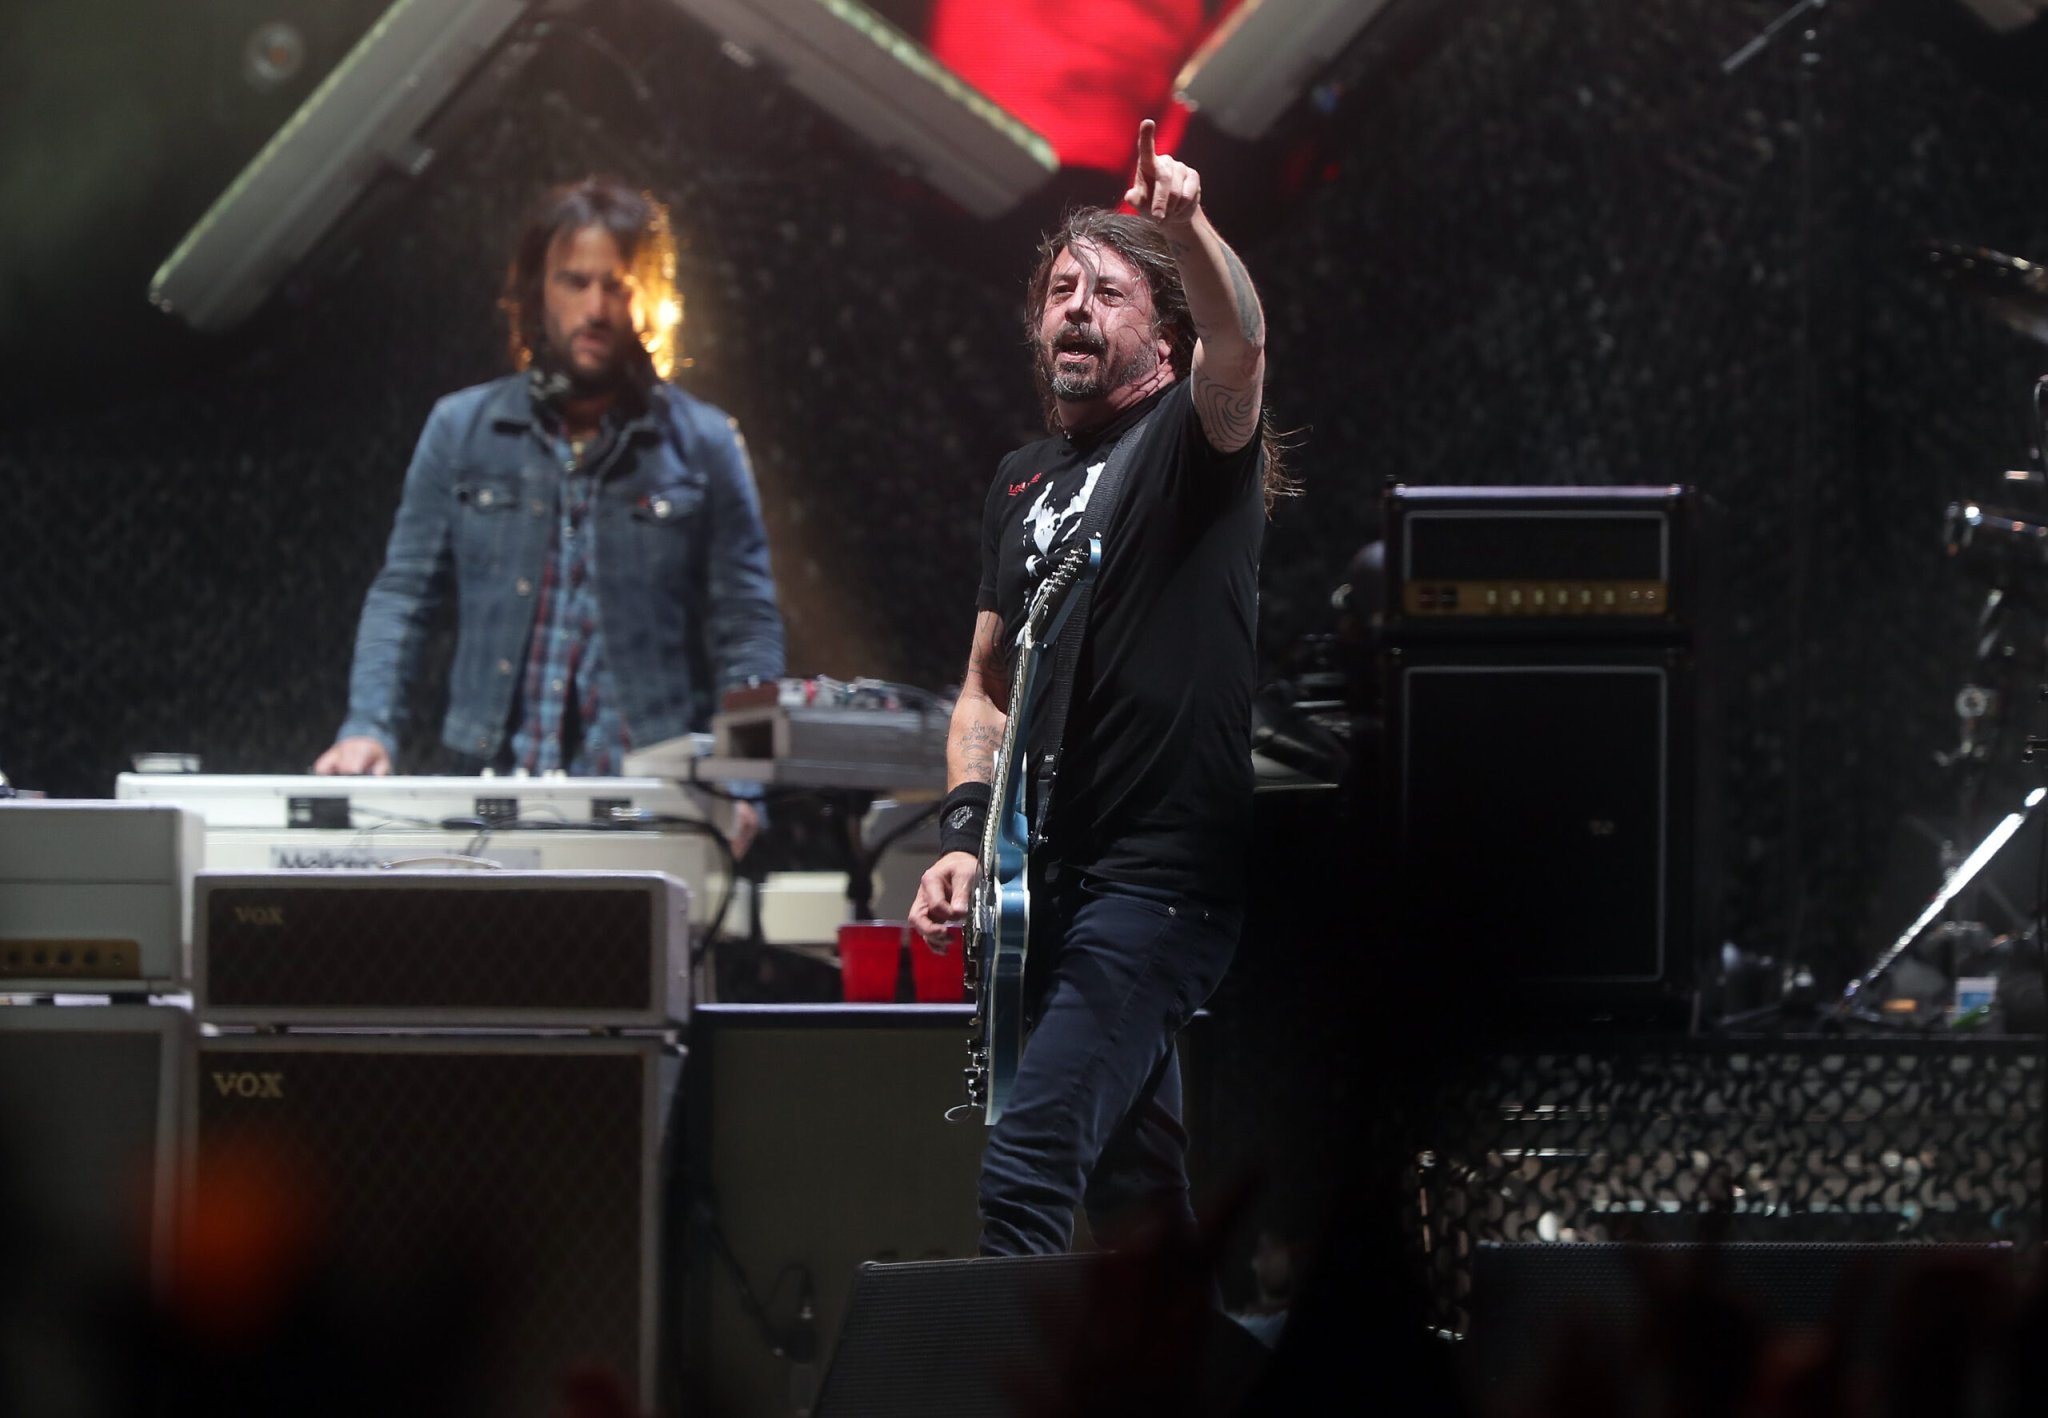 Watch Foo Fighters bring Shania Twain onstage for 'Best Of You'